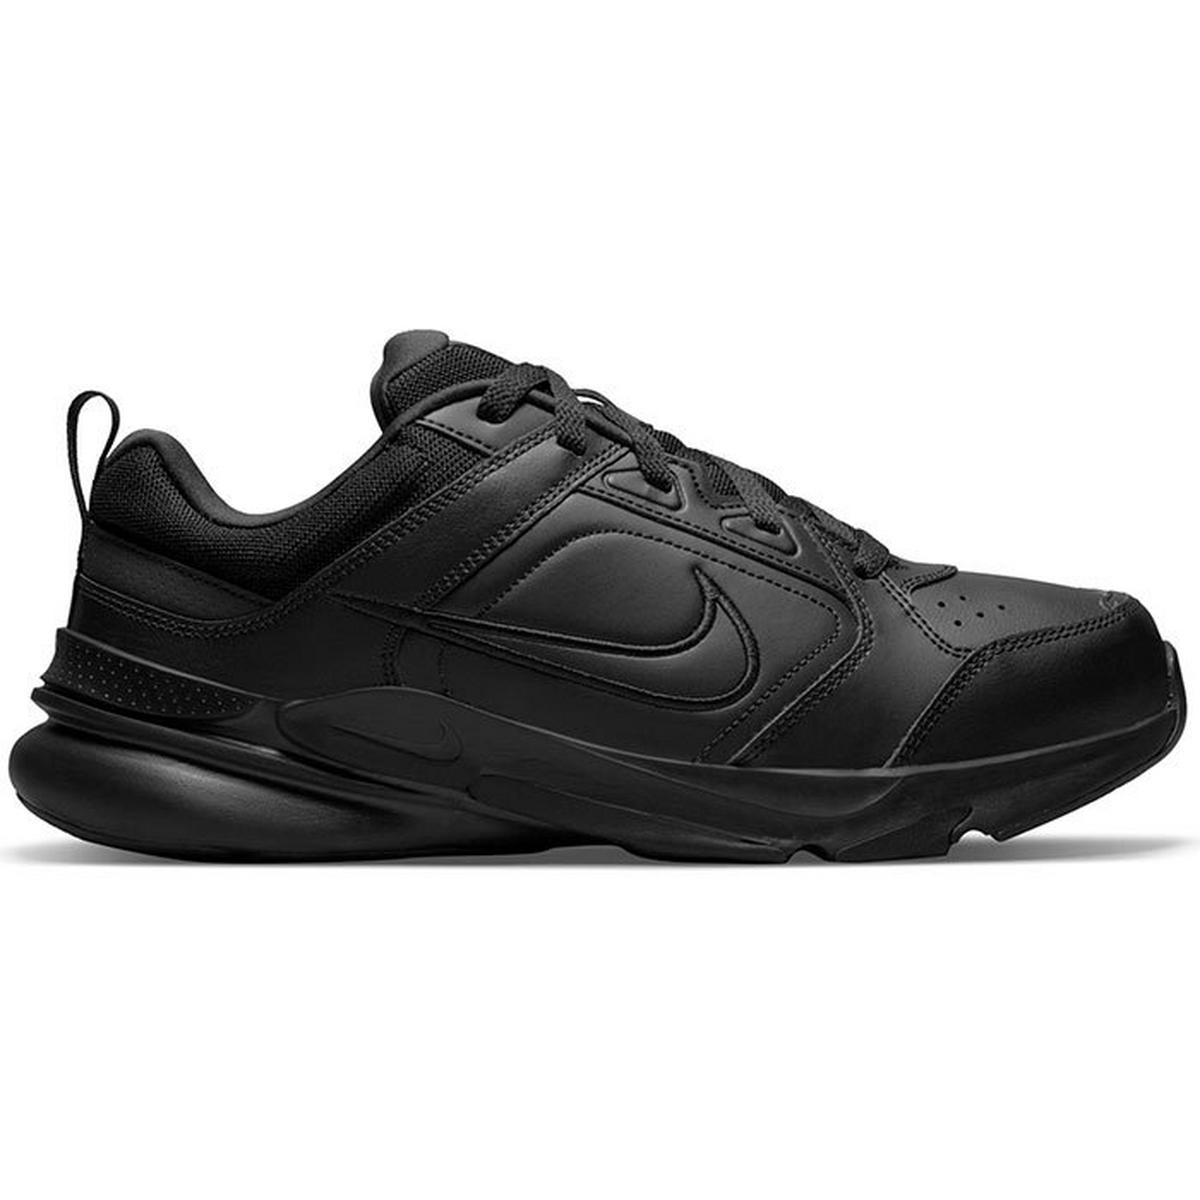 Men's Defy All Day Training Shoe (Extra Wide)